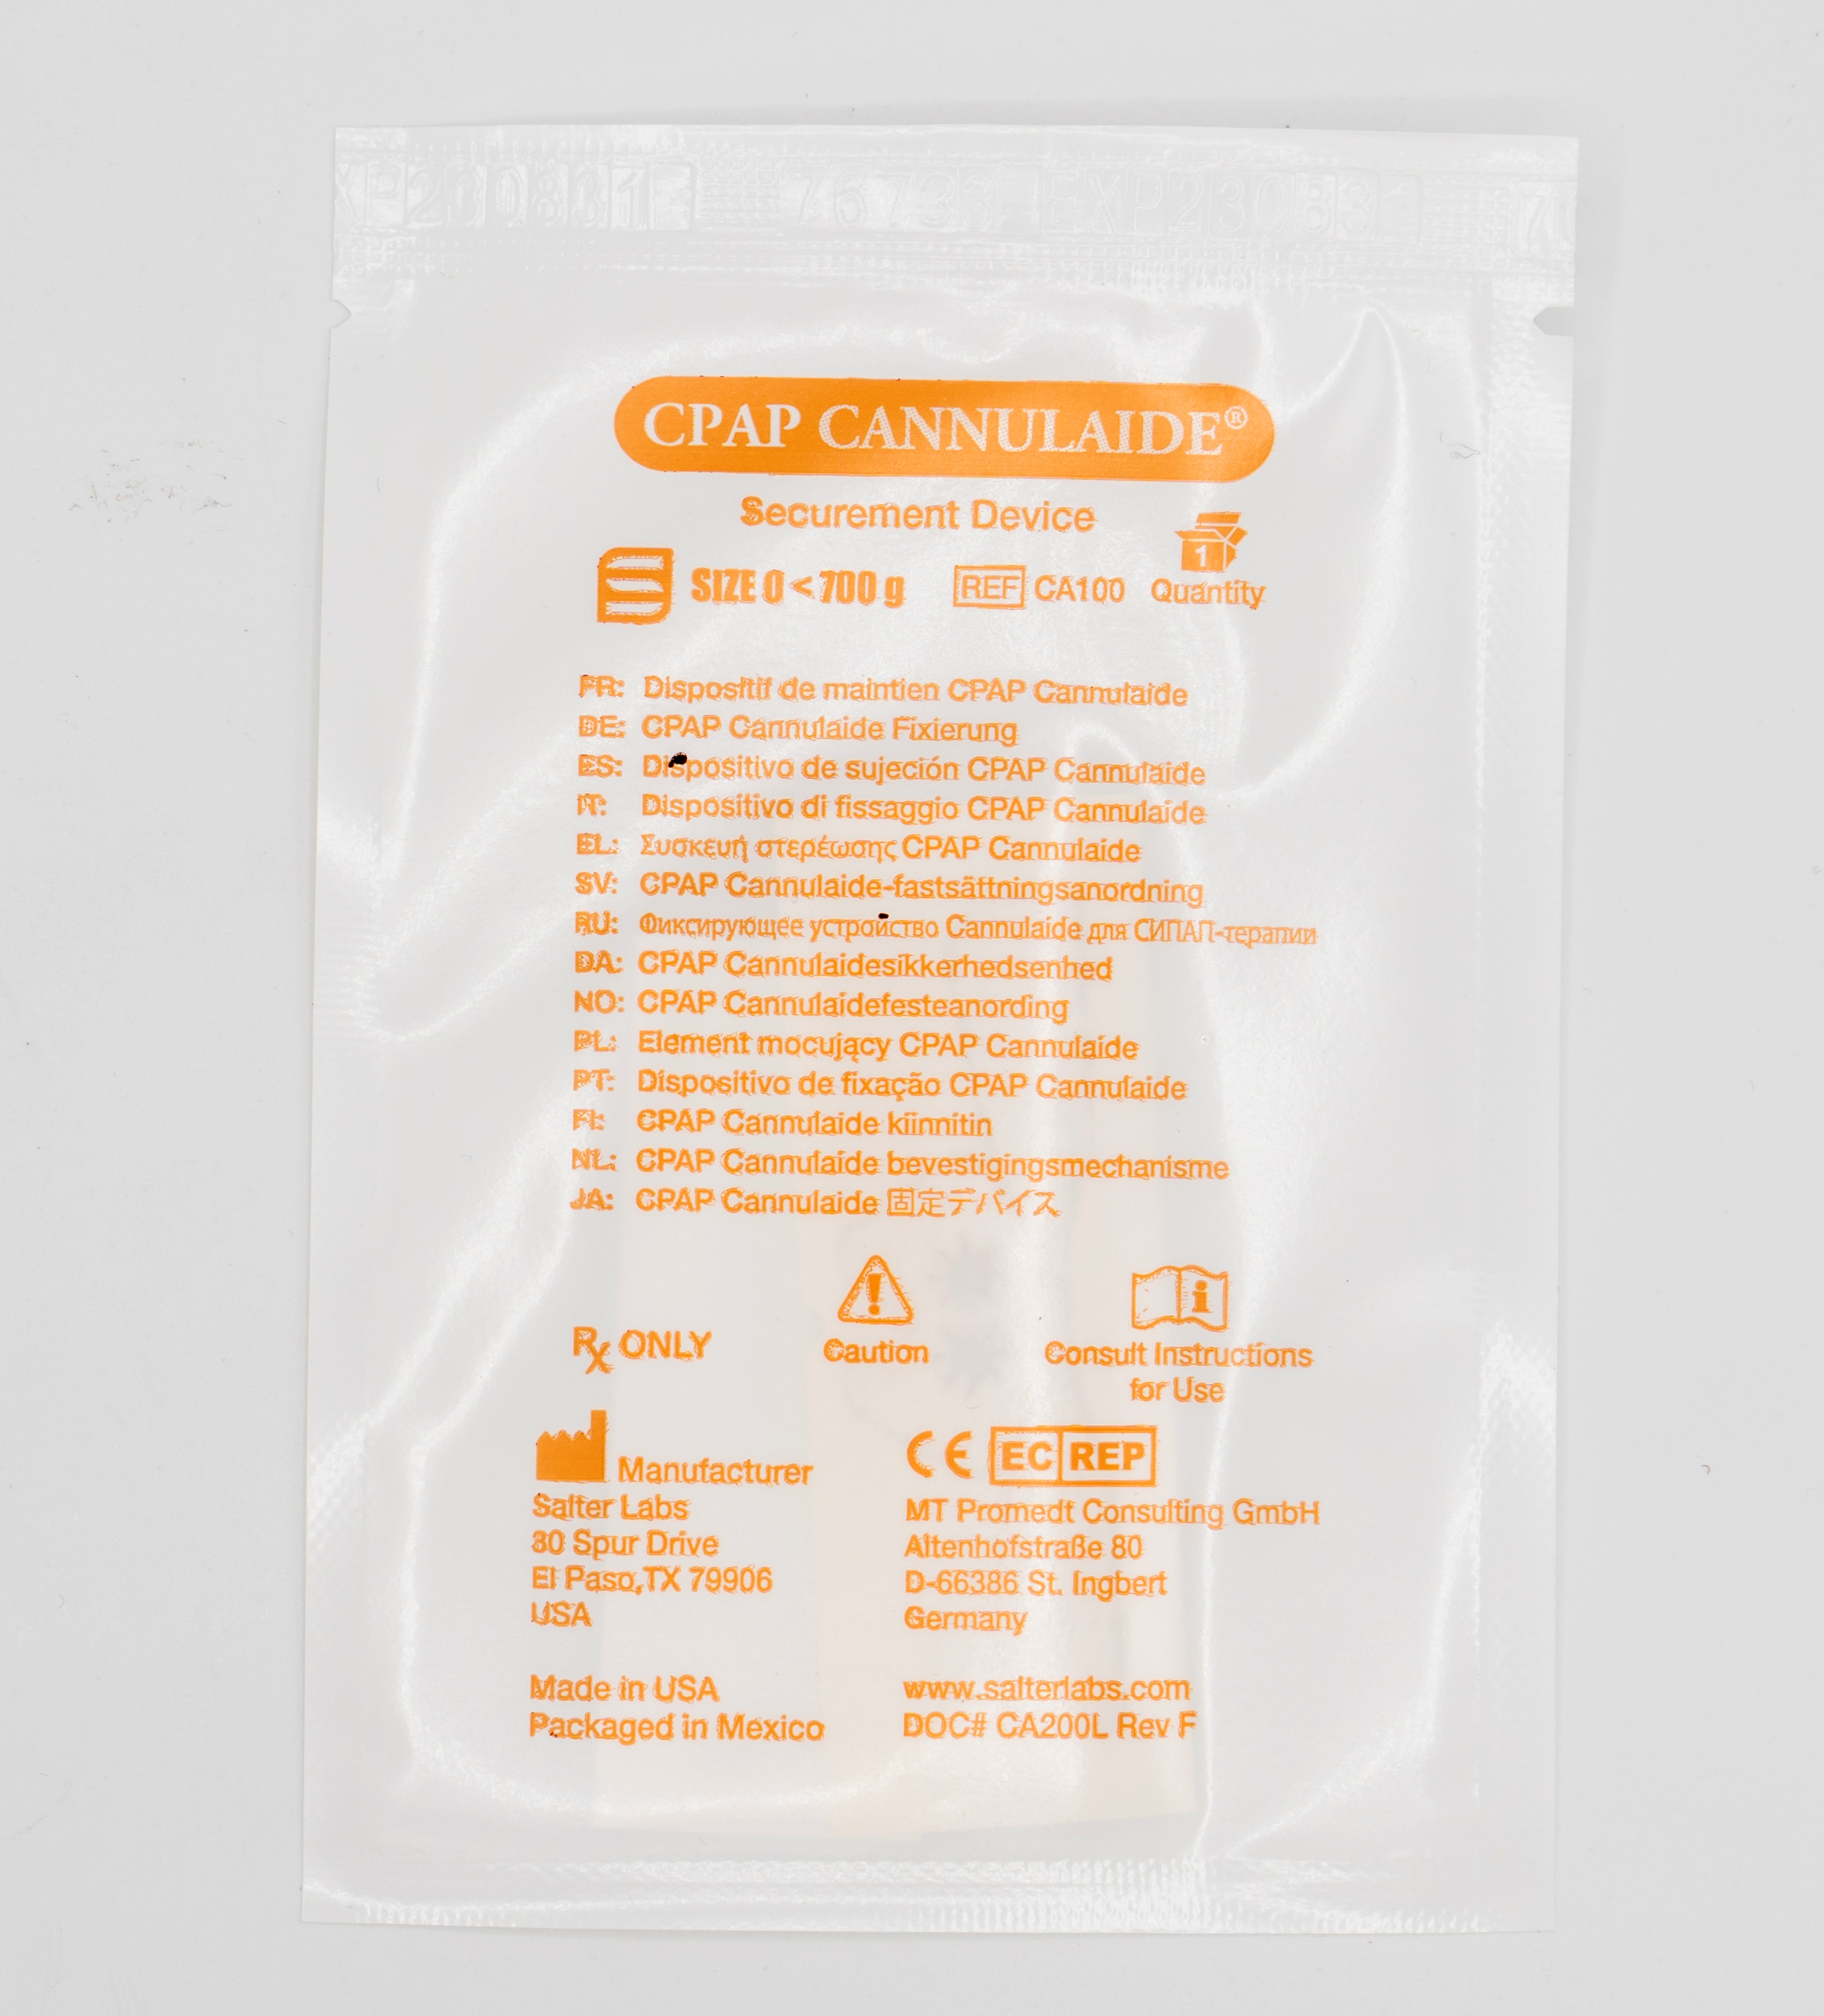 CPAP Cannulaide® Securement Device CA100-0-25 | Size 0 for babies <700g